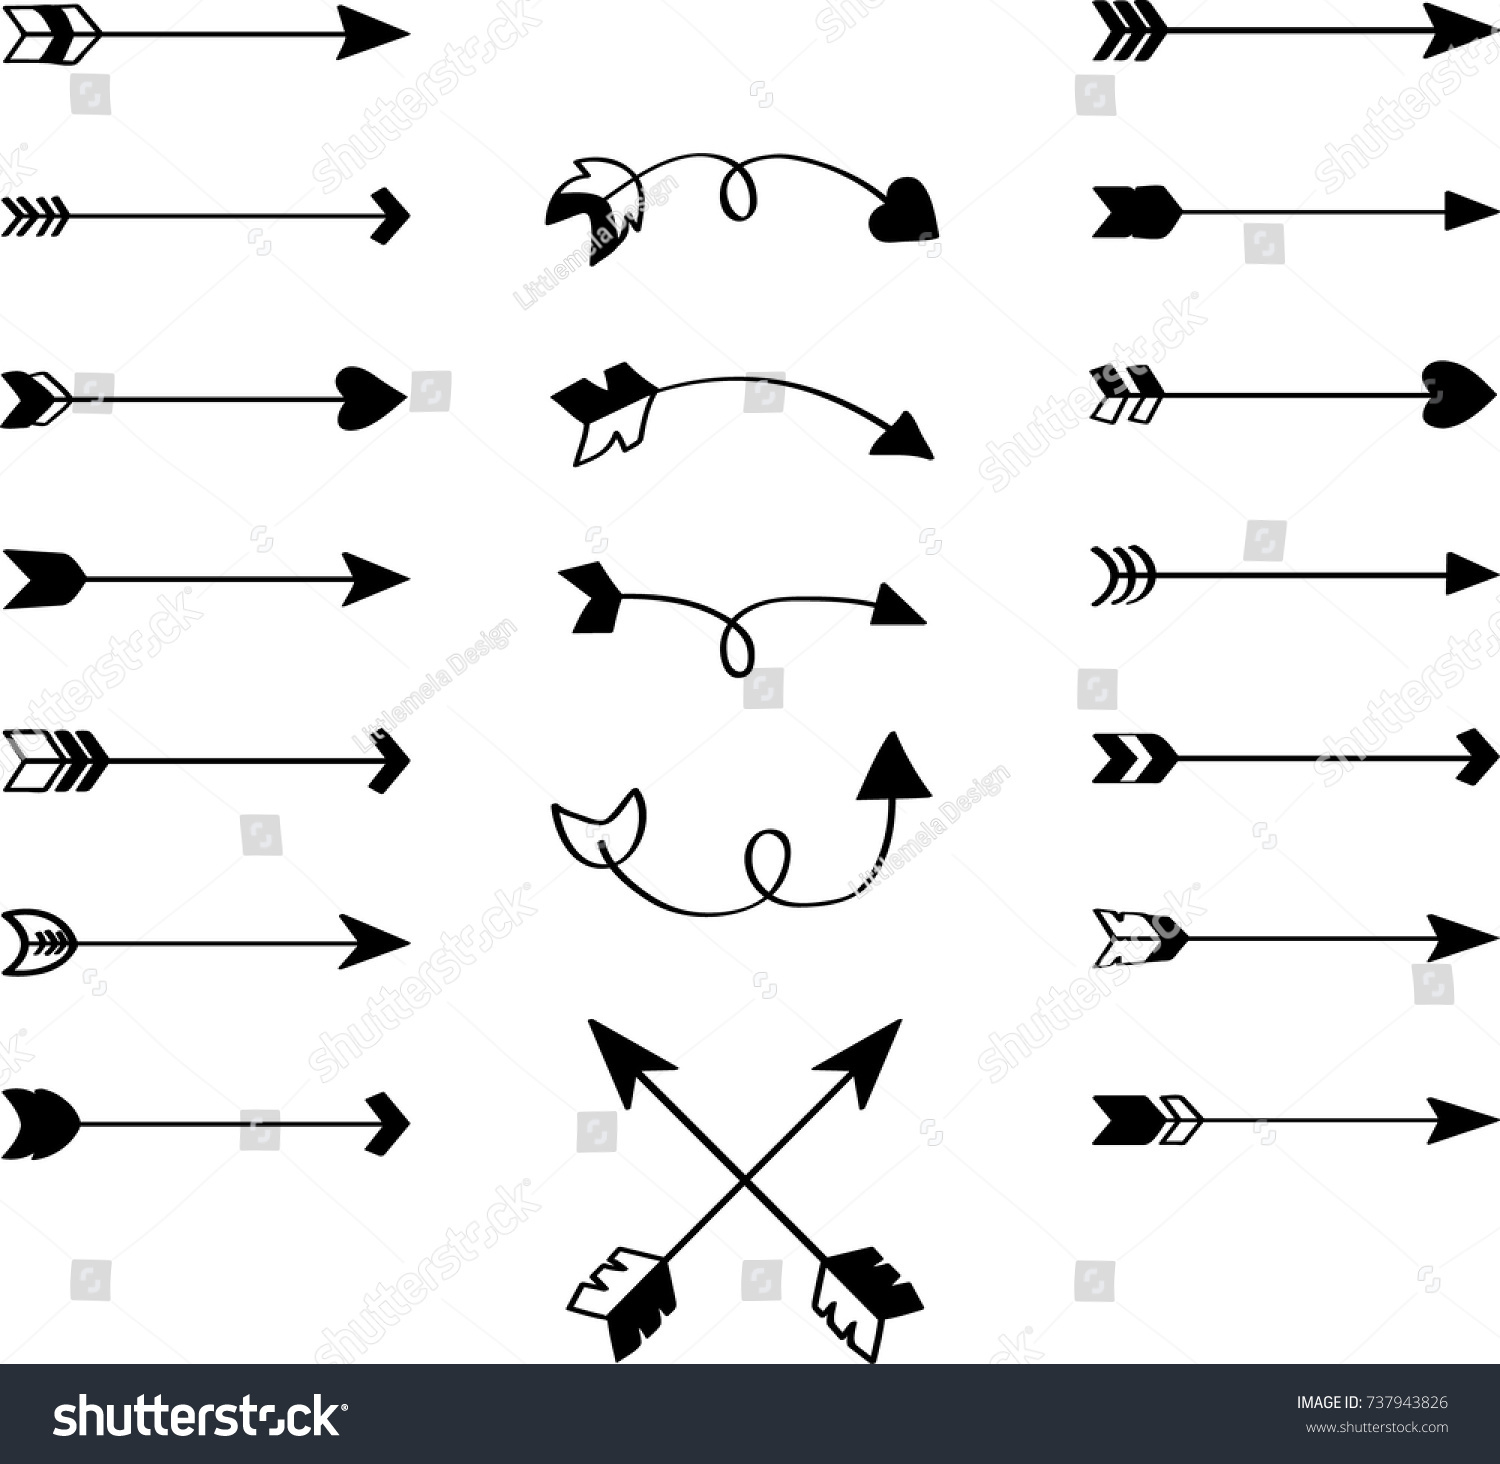 SVG of Arrows sketch, Black & White Outline, Heart, Twisted, Bent, Swirl, twisted, curved, crossed, Indian, drawing, Twisted, Words, Love, Peace, Joy, one way, collection, freehand, illustration, Icon, Sign svg